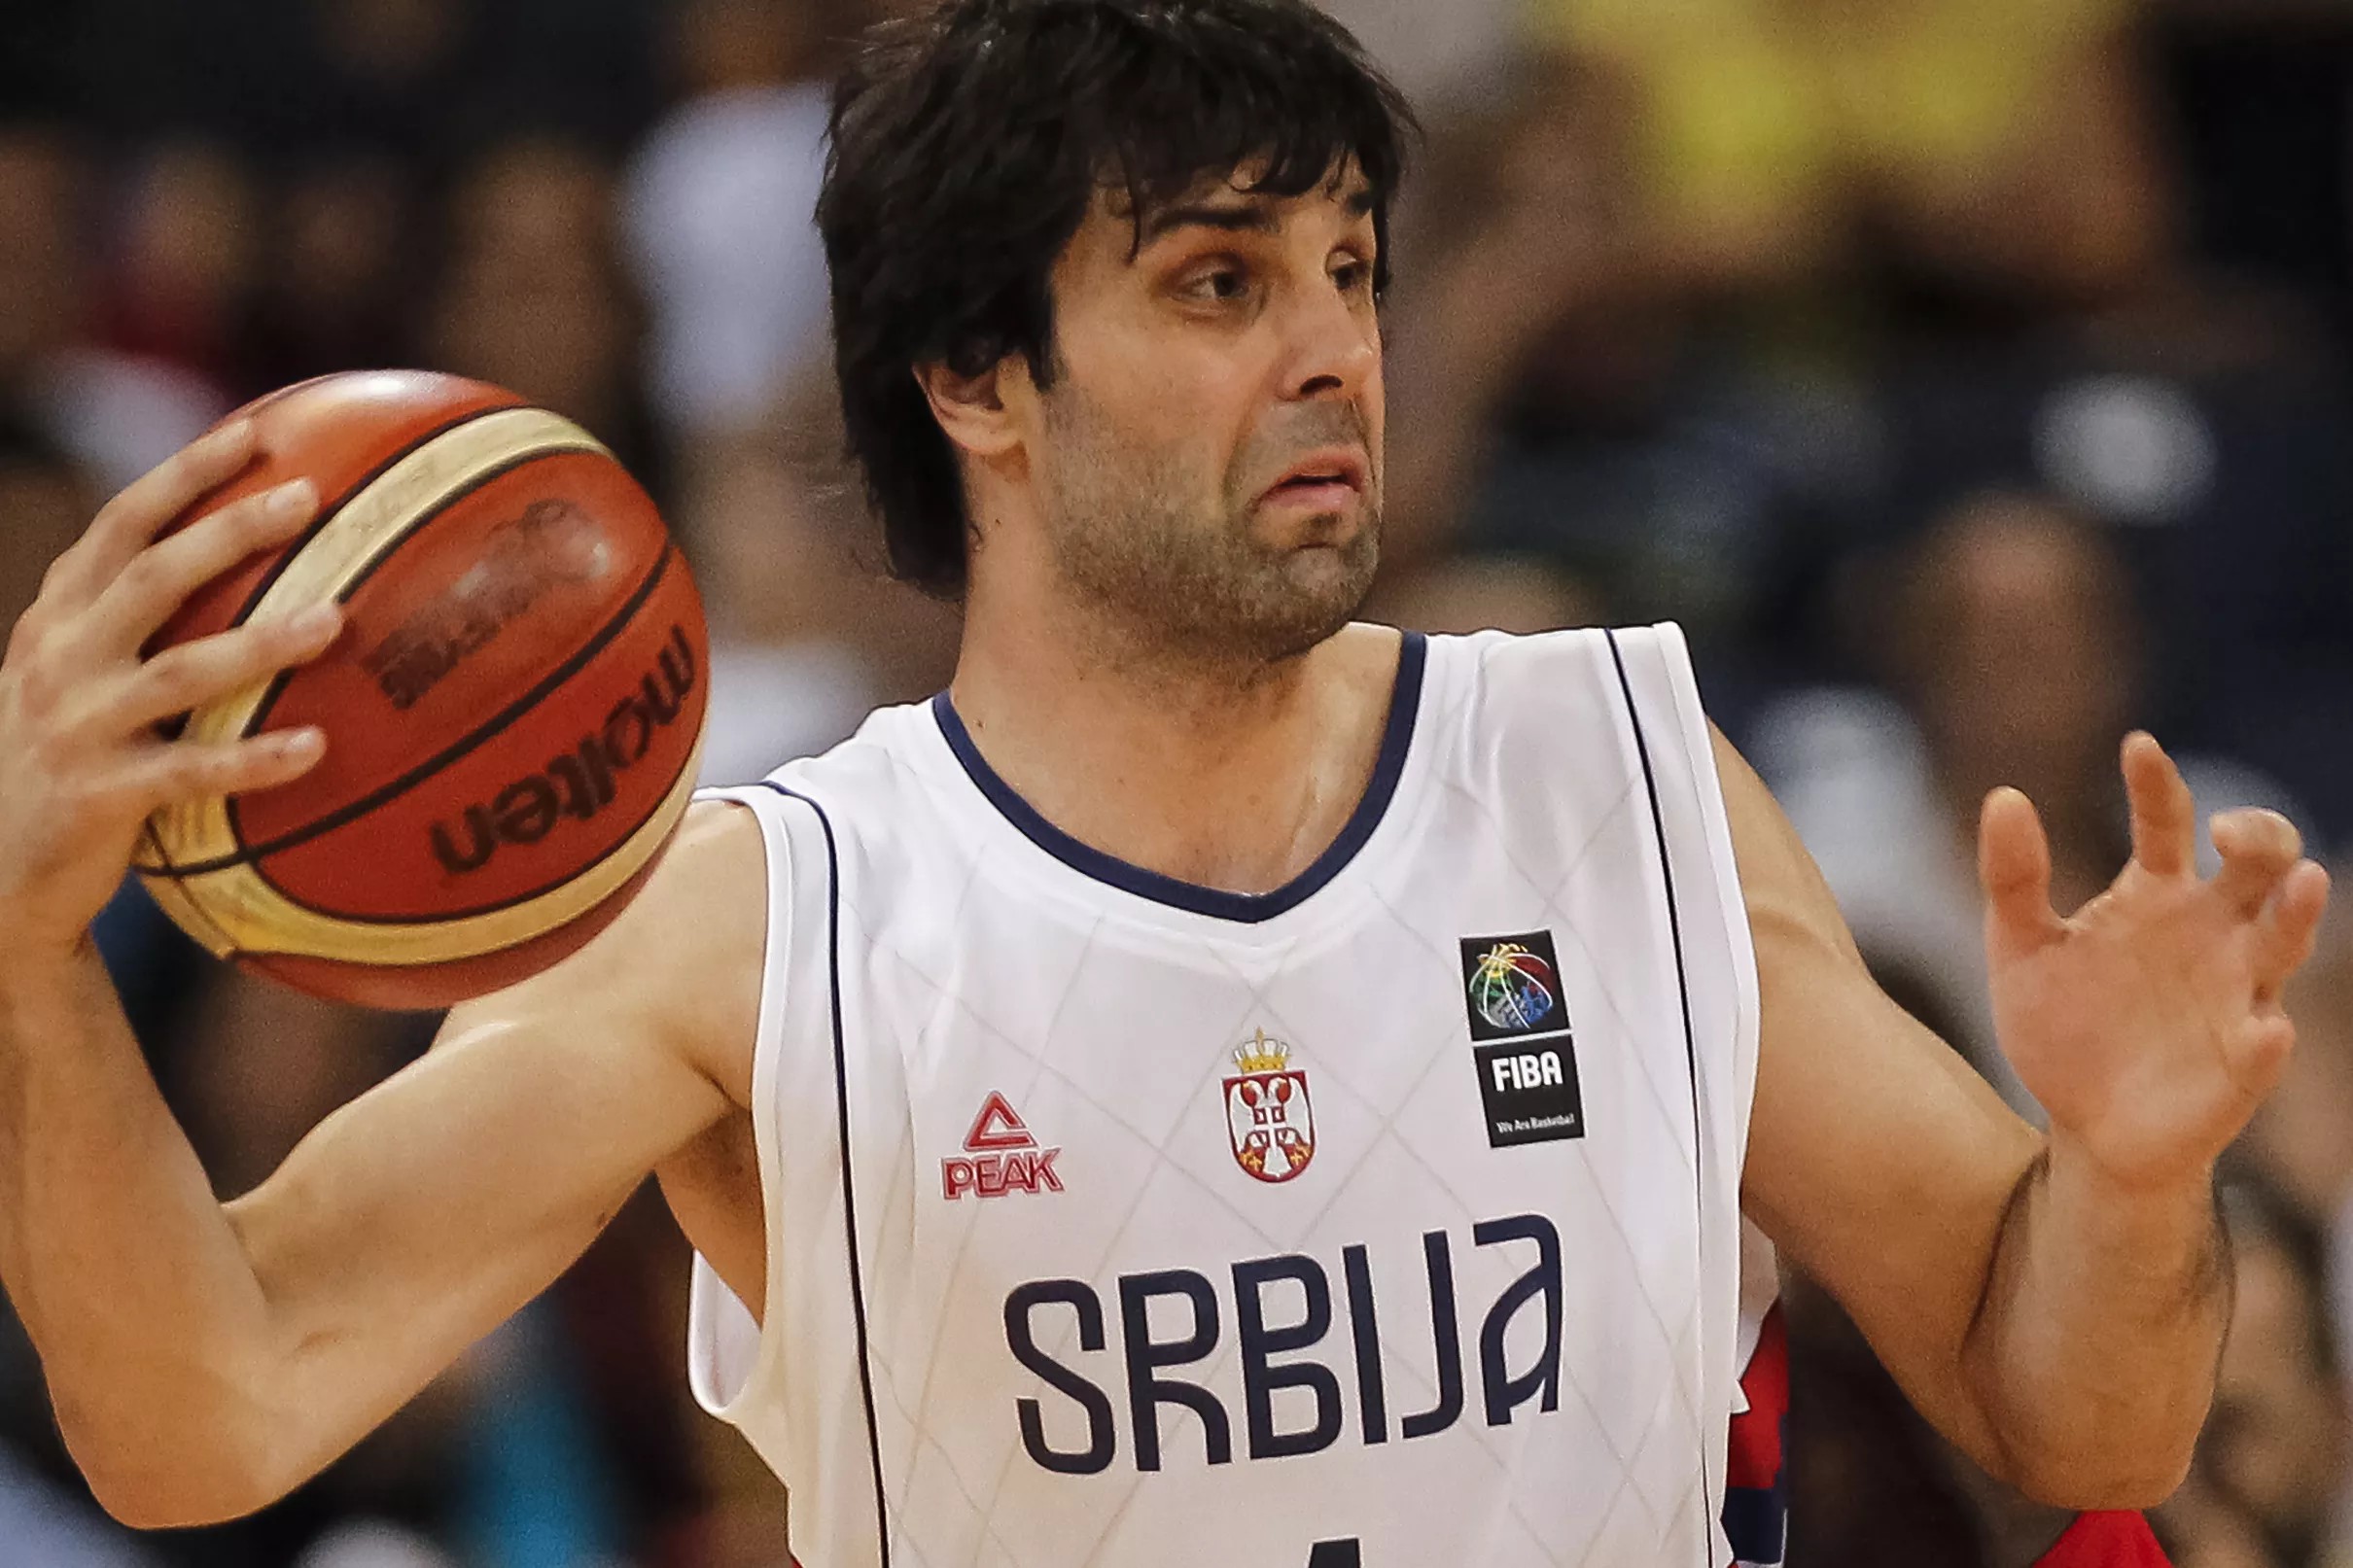 Do Positives Outweigh Negatives for Teodosic and Vesely?